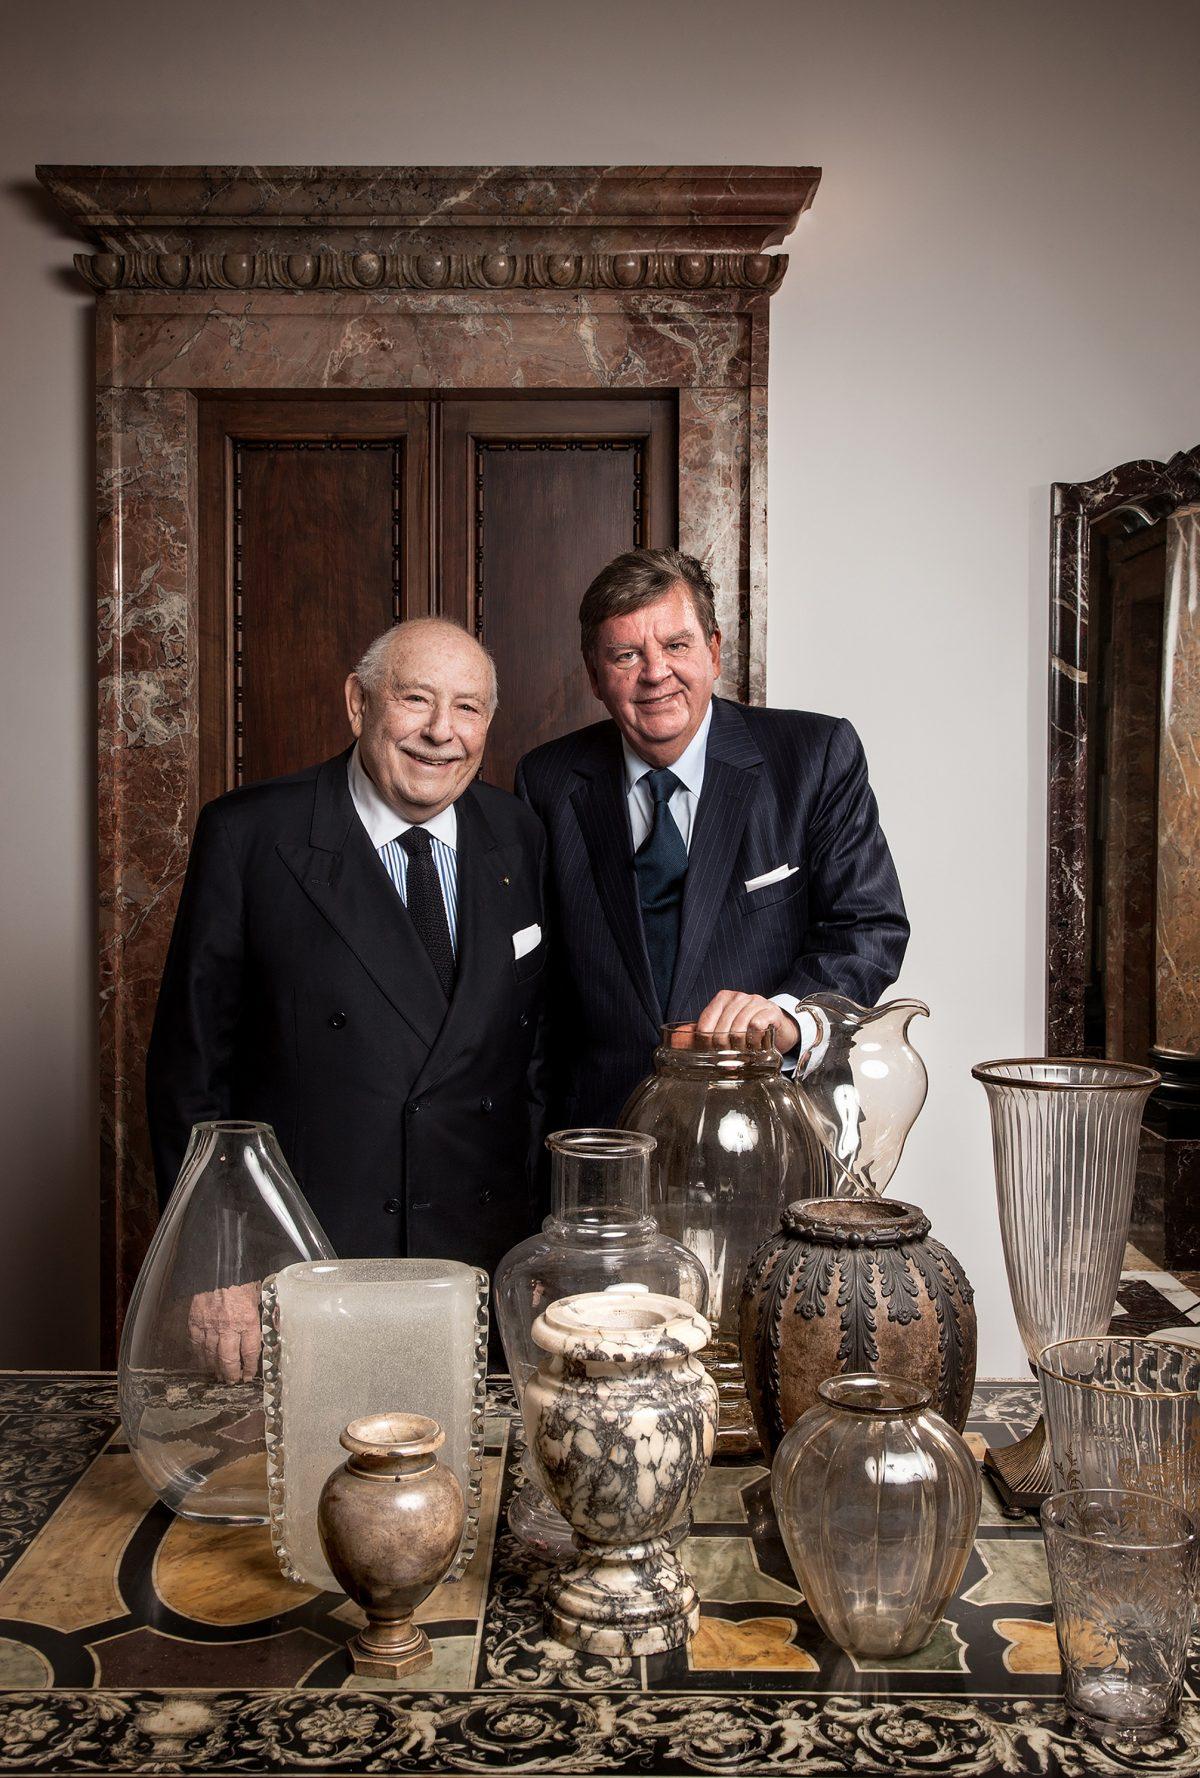 The Michelangelo Foundation for Creativity and Craftsmanship founders Franco Cologni (L) and Johann Rupert. “Rock stars and sports heroes are venerated while someone who can transform raw material into a gorgeous, useful product with their own two hands is for the most part entirely disregarded,” writes Johann Rupert co-founder of the Michelangelo Foundation for Creativity and Craftsmanship on the “Homo Faber” event website. (Laila Pozzo)